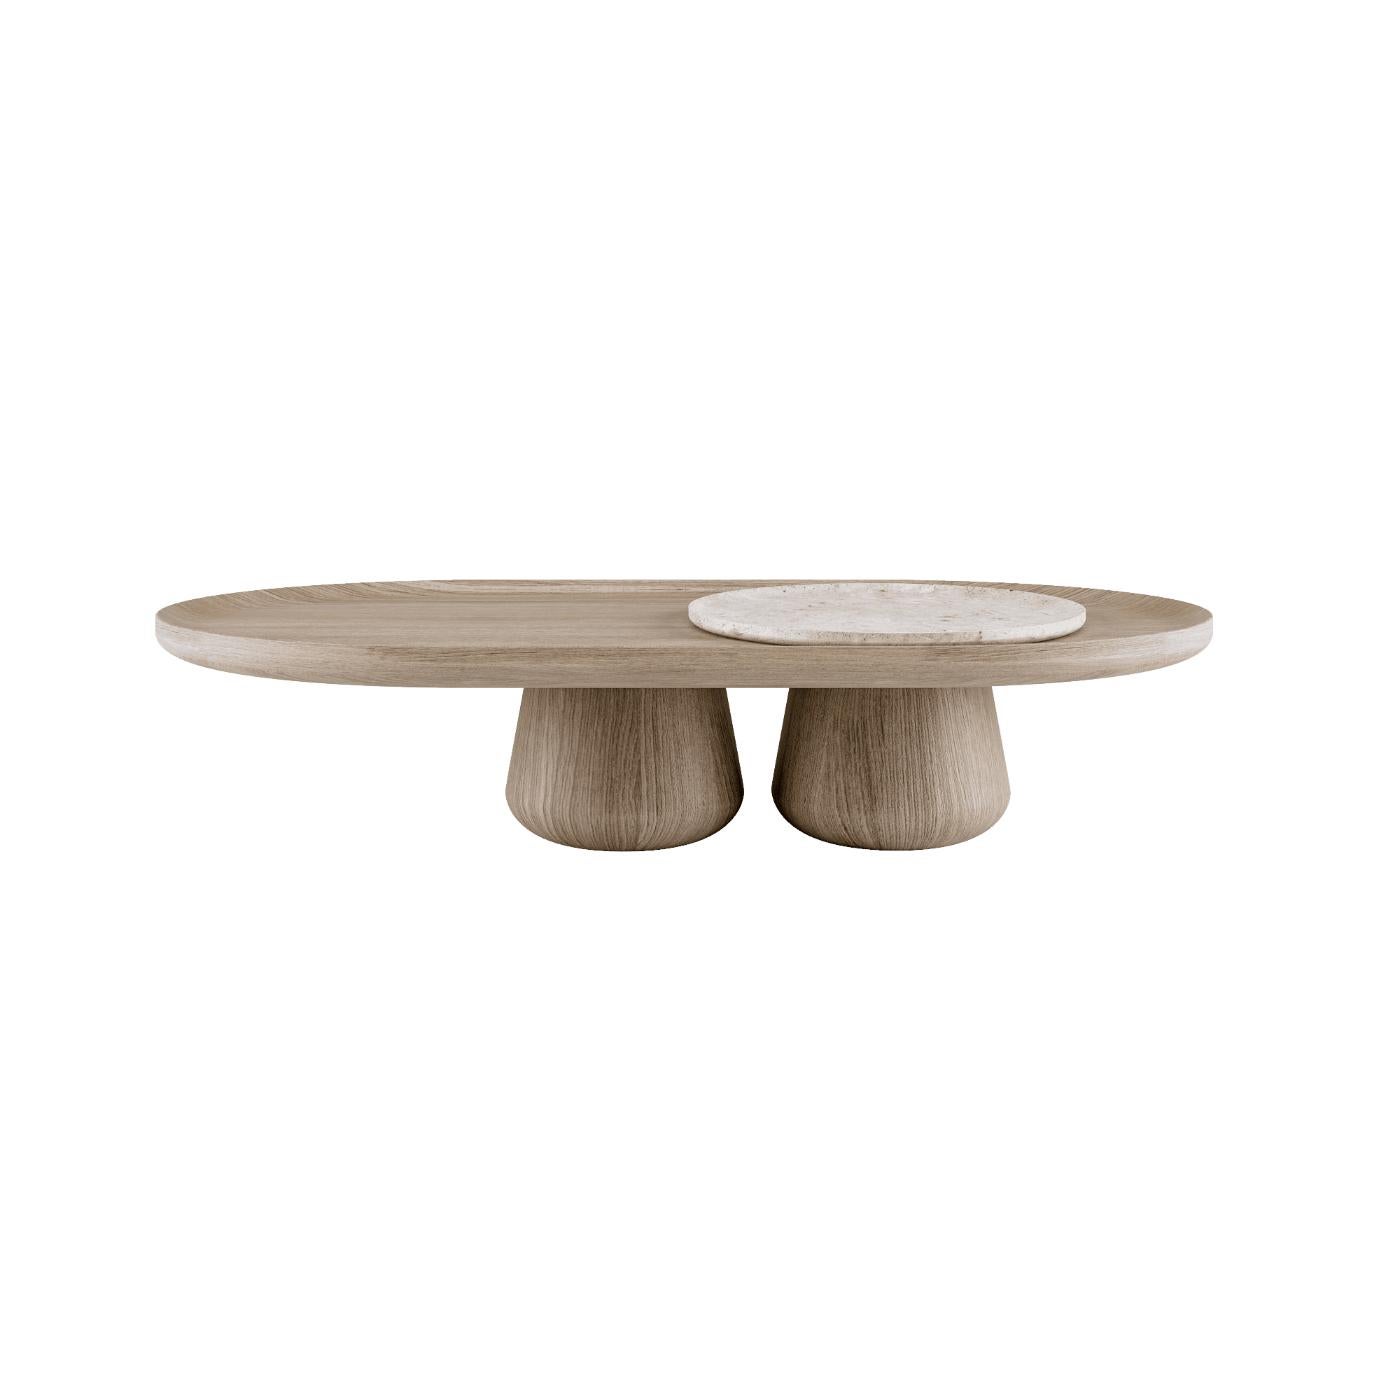 Large Alpi Gray Bold Coffee Table by Mohdern
Dimensions: W 140 x D 80 x H 30 cm (Marble Tray Included ⌀ 52 cm)
Materials: Solid Ash


Bold is a refined collection of coffee tables designed and produced by the Mohdern brand. Available in three sizes.